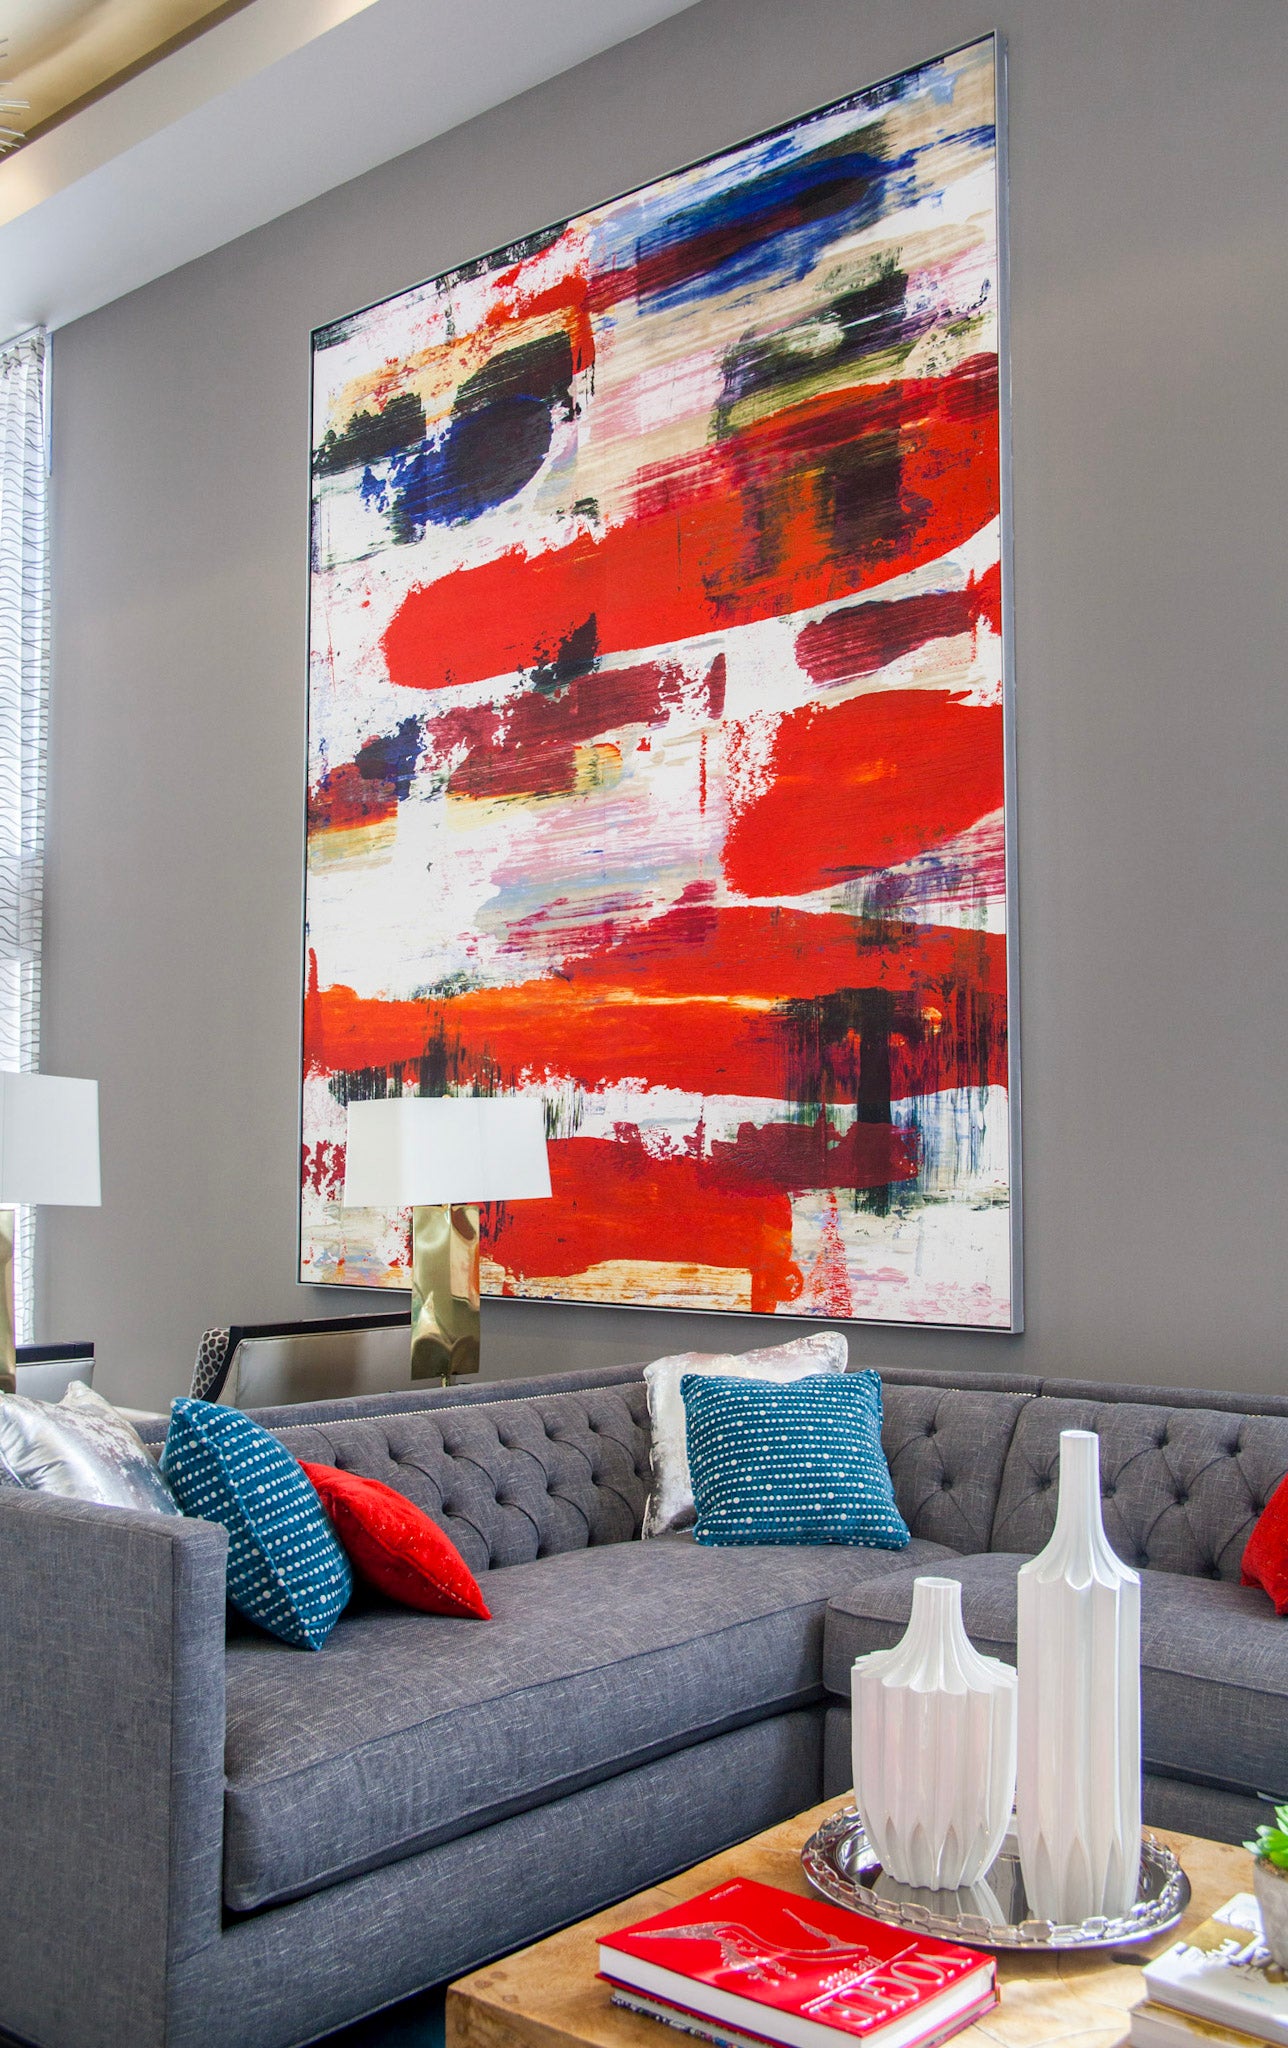 An abstract painting with bold brushstrokes in red, blue, and white dominates the lobby of Next on Sixth Apartments, complementing the sleek grey couch and vibrant throw pillows, contributing to the stylish atmosphere.